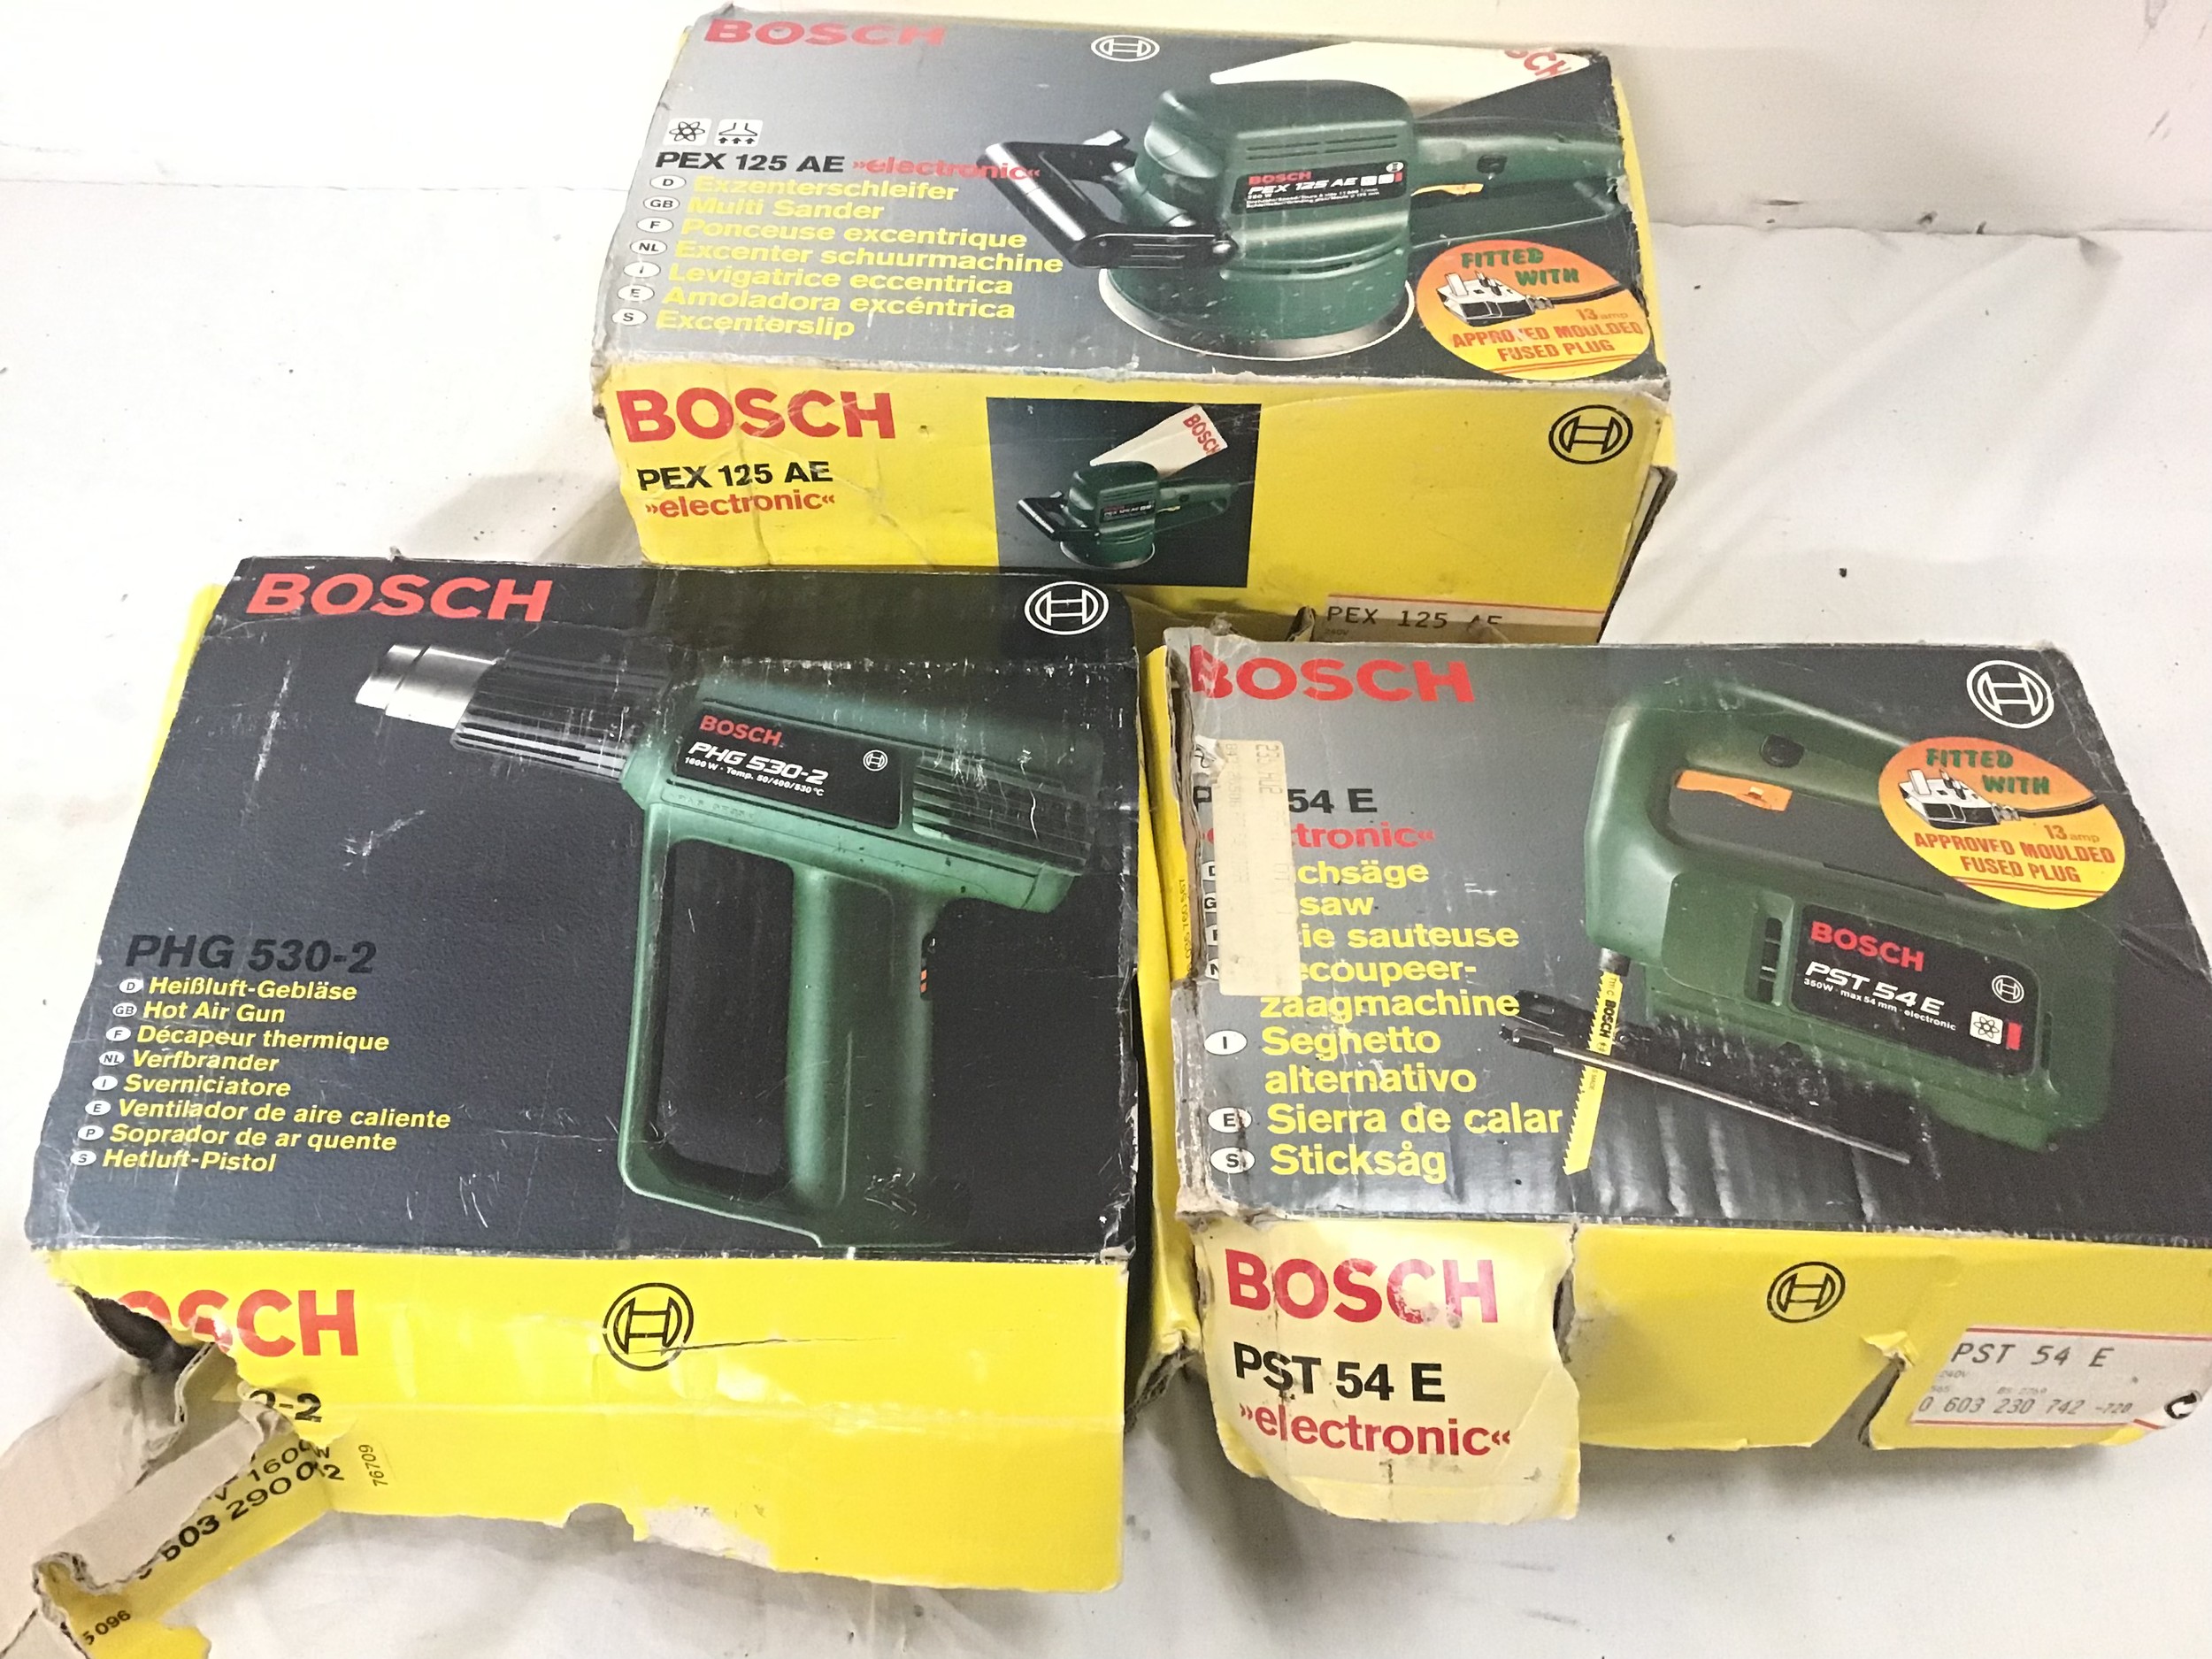 Bosch group of boxed tools to include jigsaw, multi sander and hot air gun. - Image 2 of 2